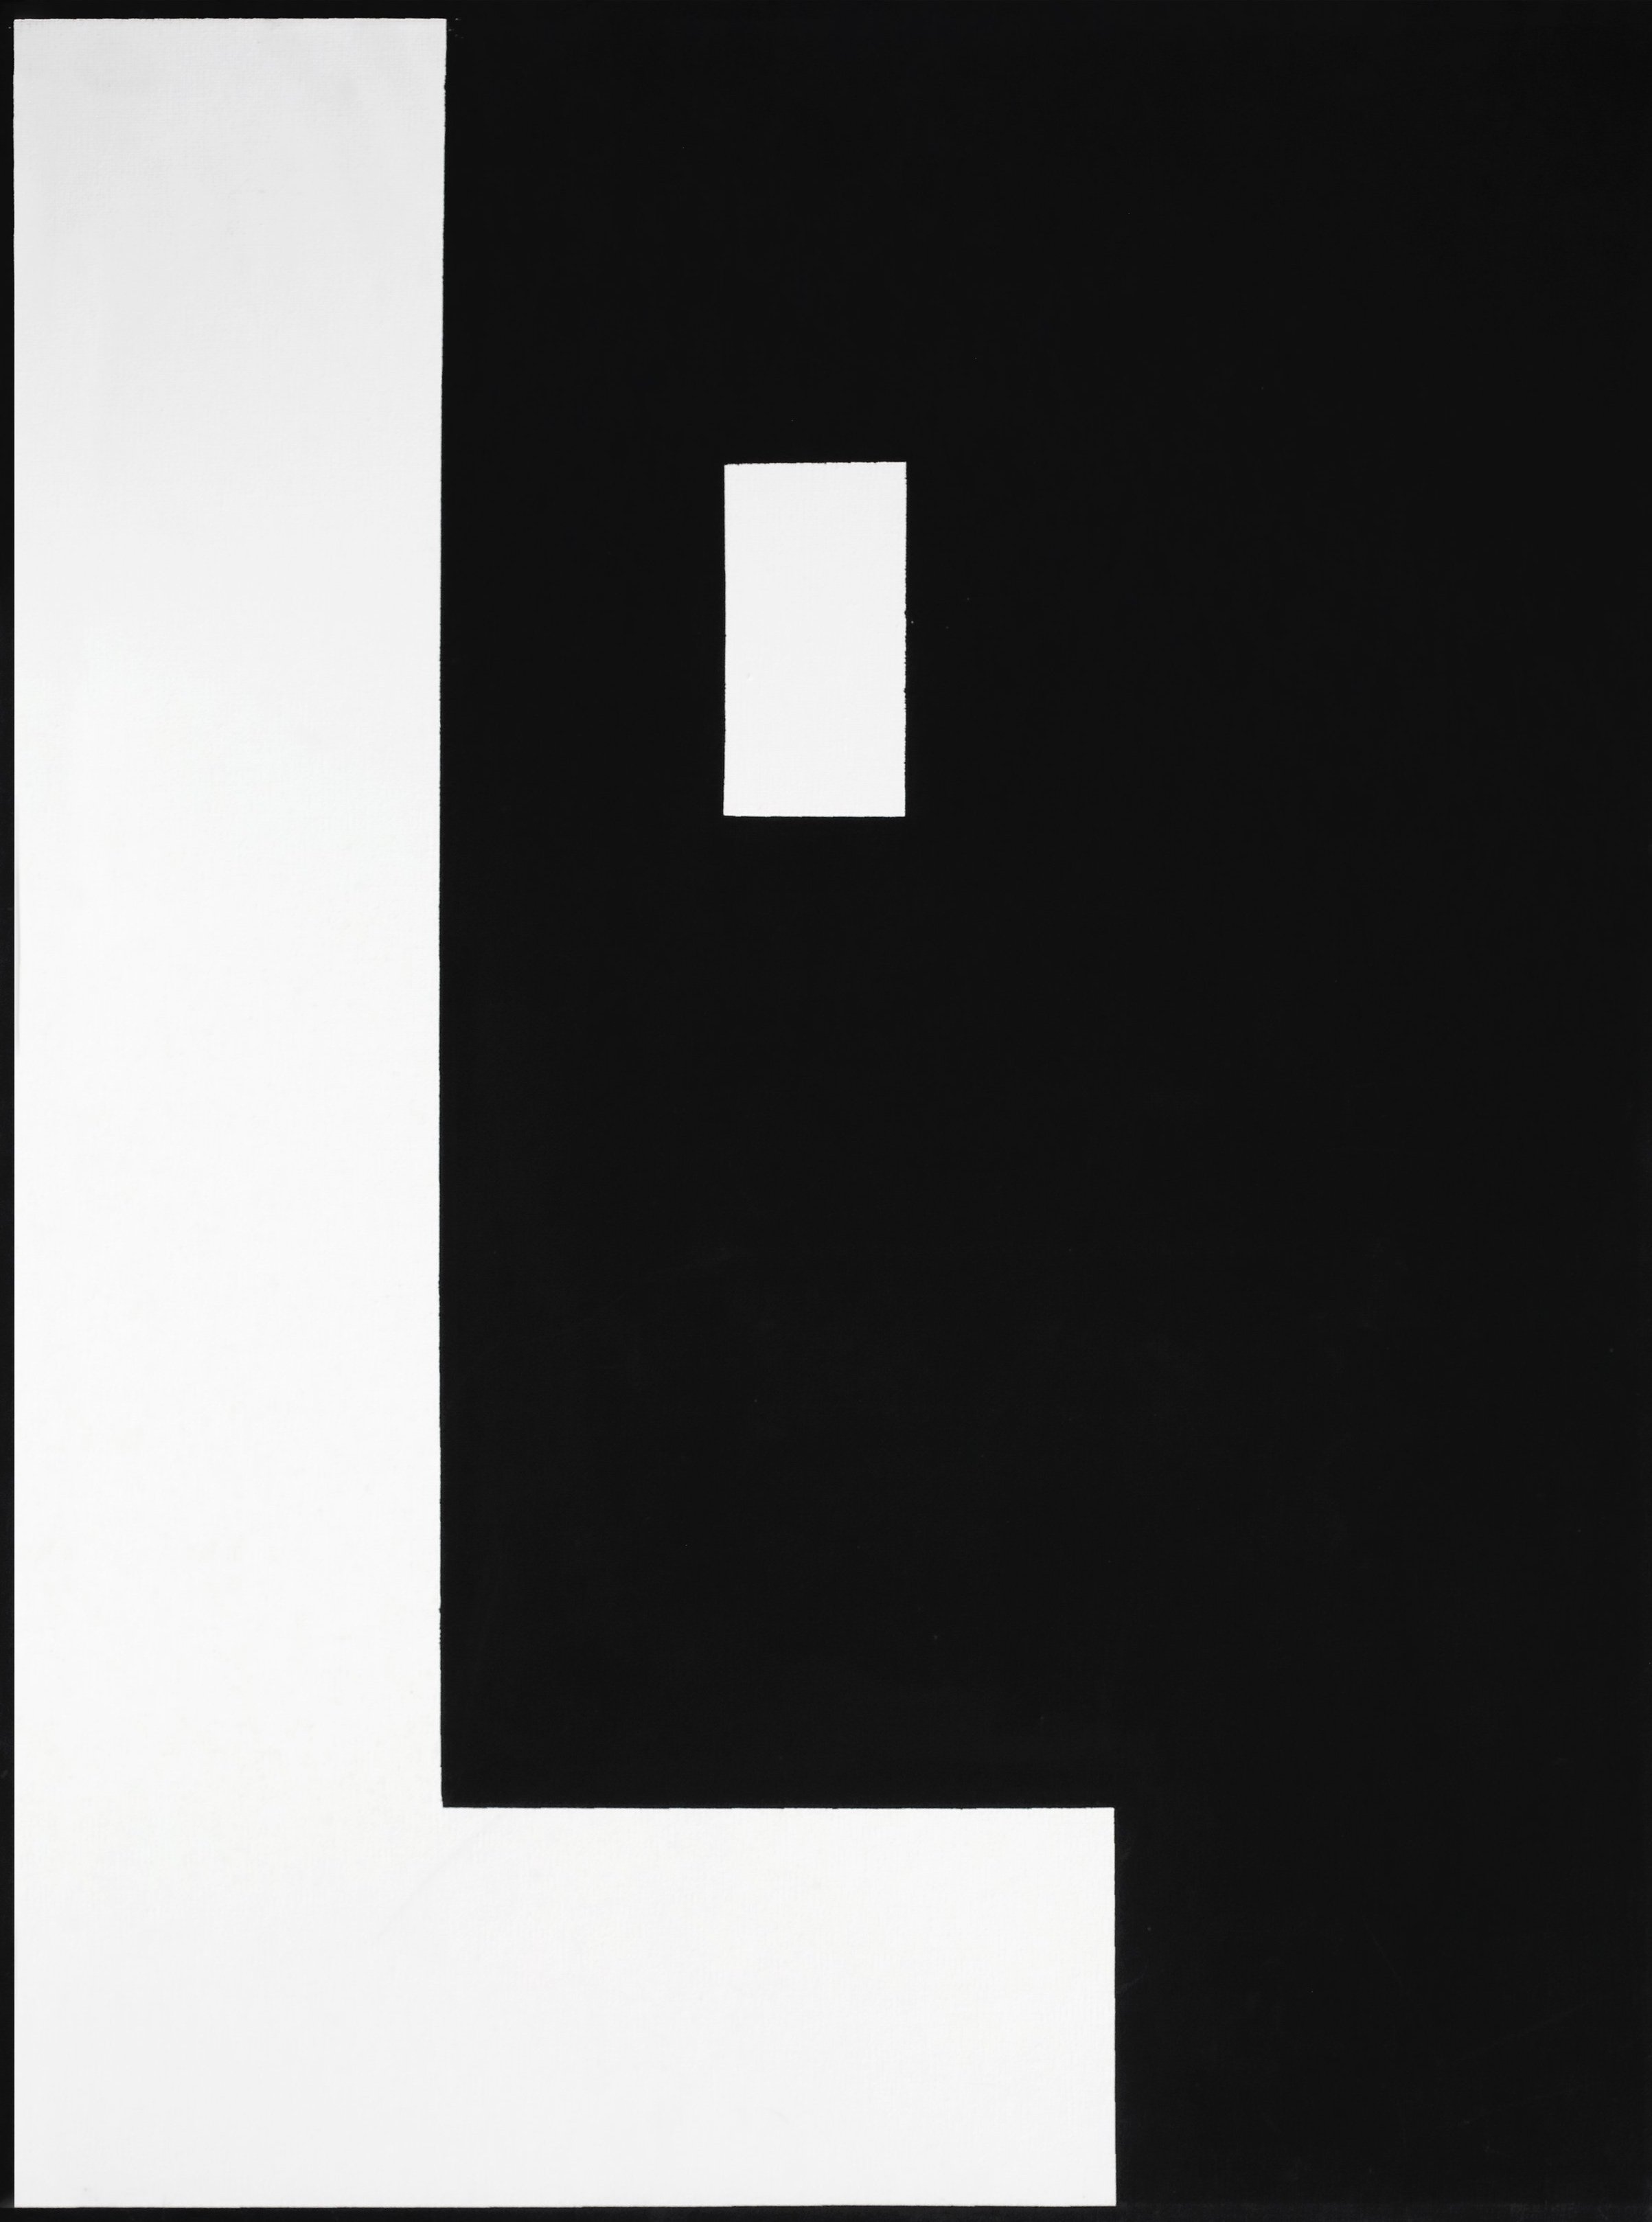 L'(Assente) The absent one, 1971
serigraph on paper